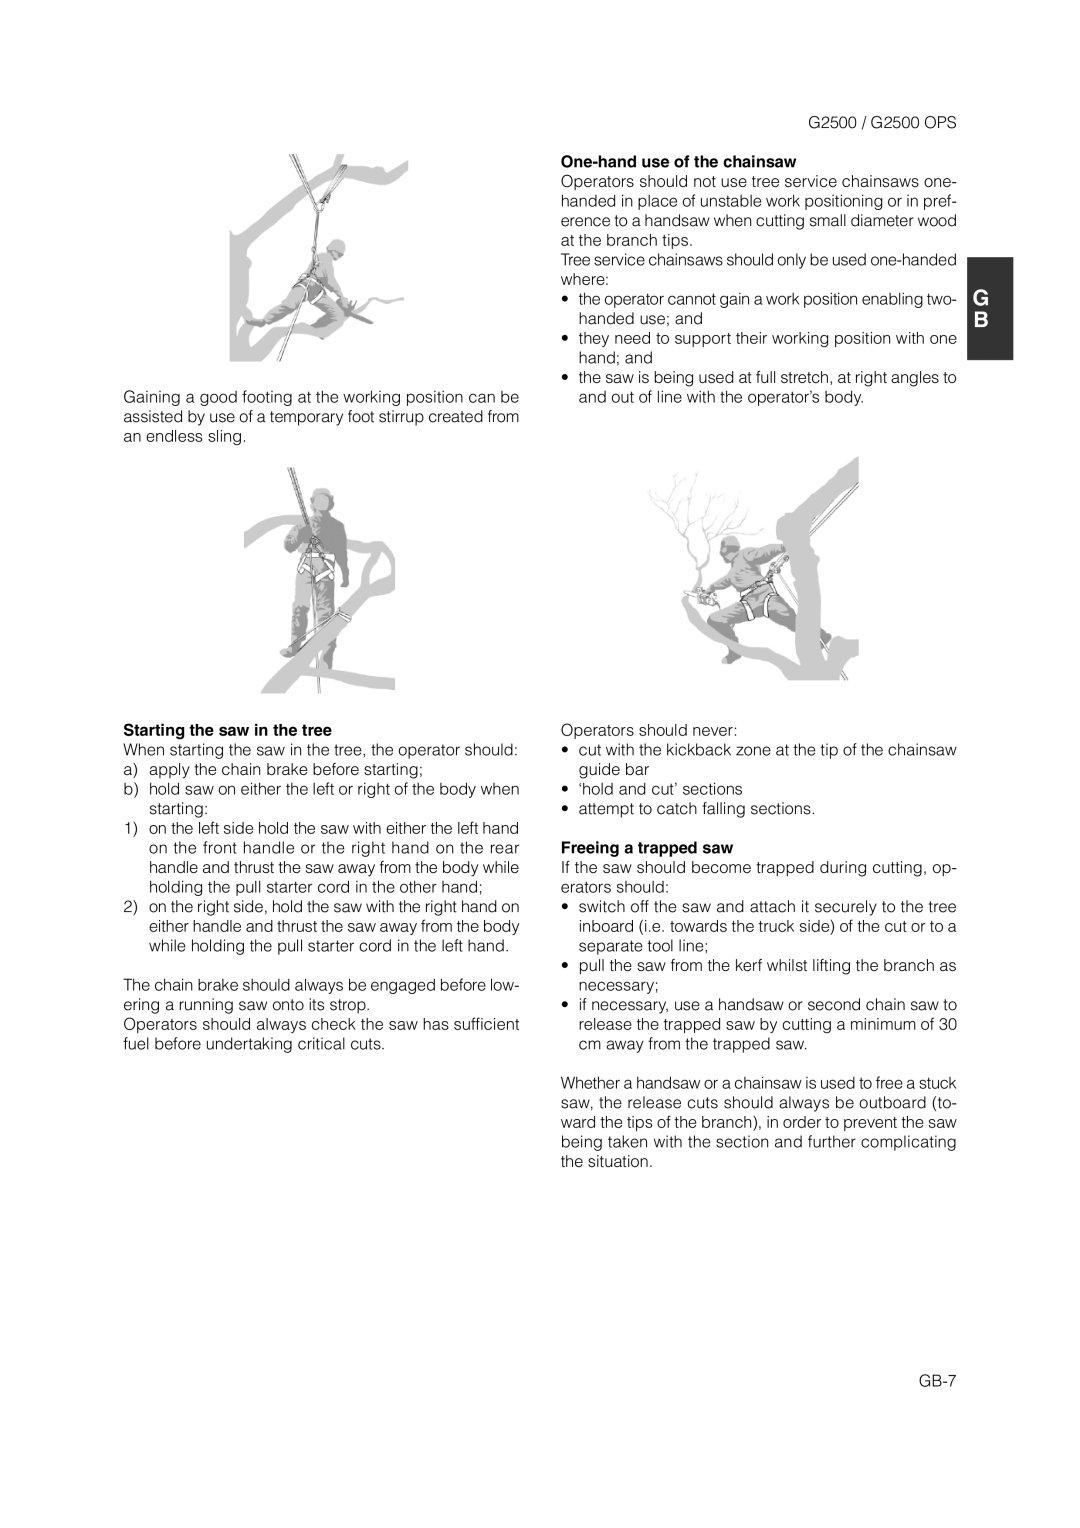 Zenoah G2500 OPS owner manual One-handuse of the chainsaw, Starting the saw in the tree, Freeing a trapped saw 